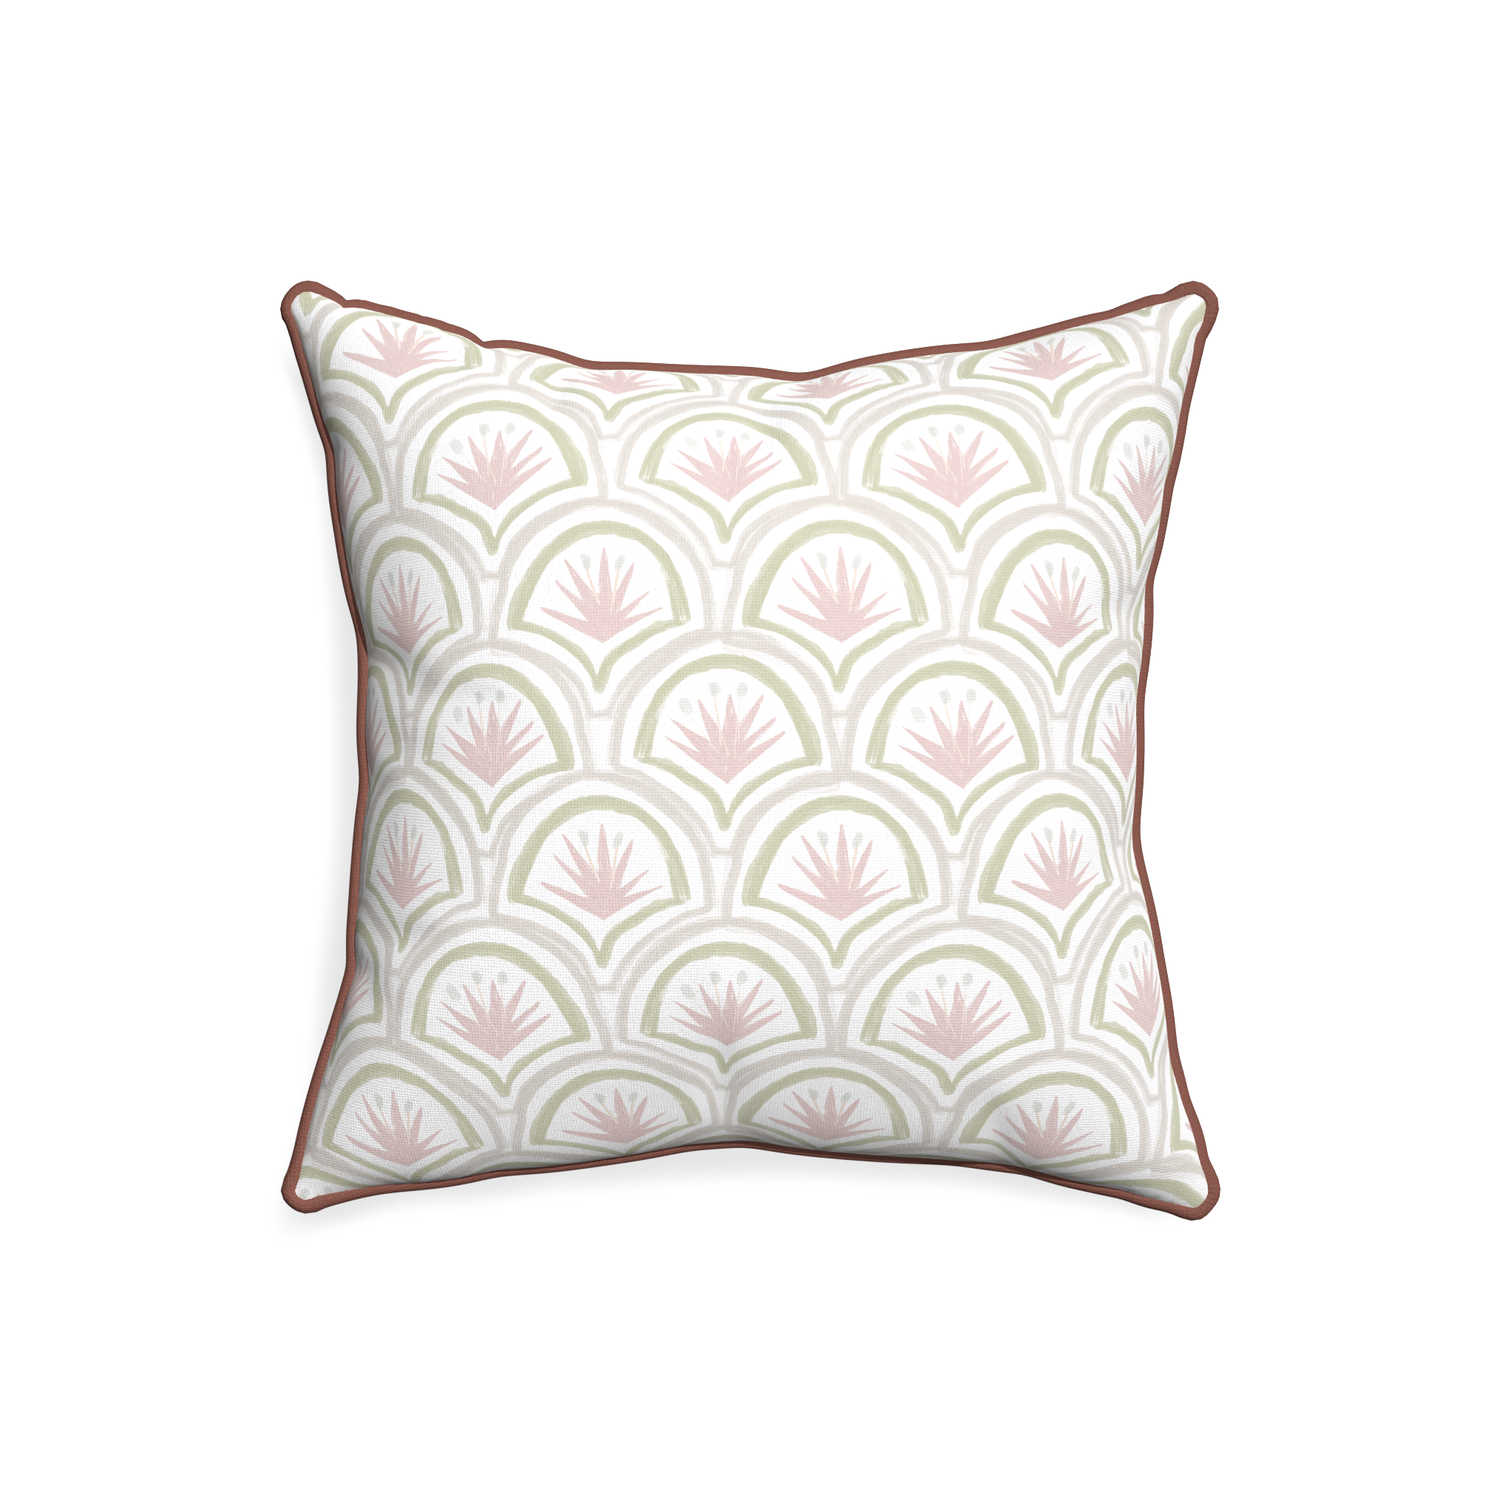 20-square thatcher rose custom pillow with w piping on white background